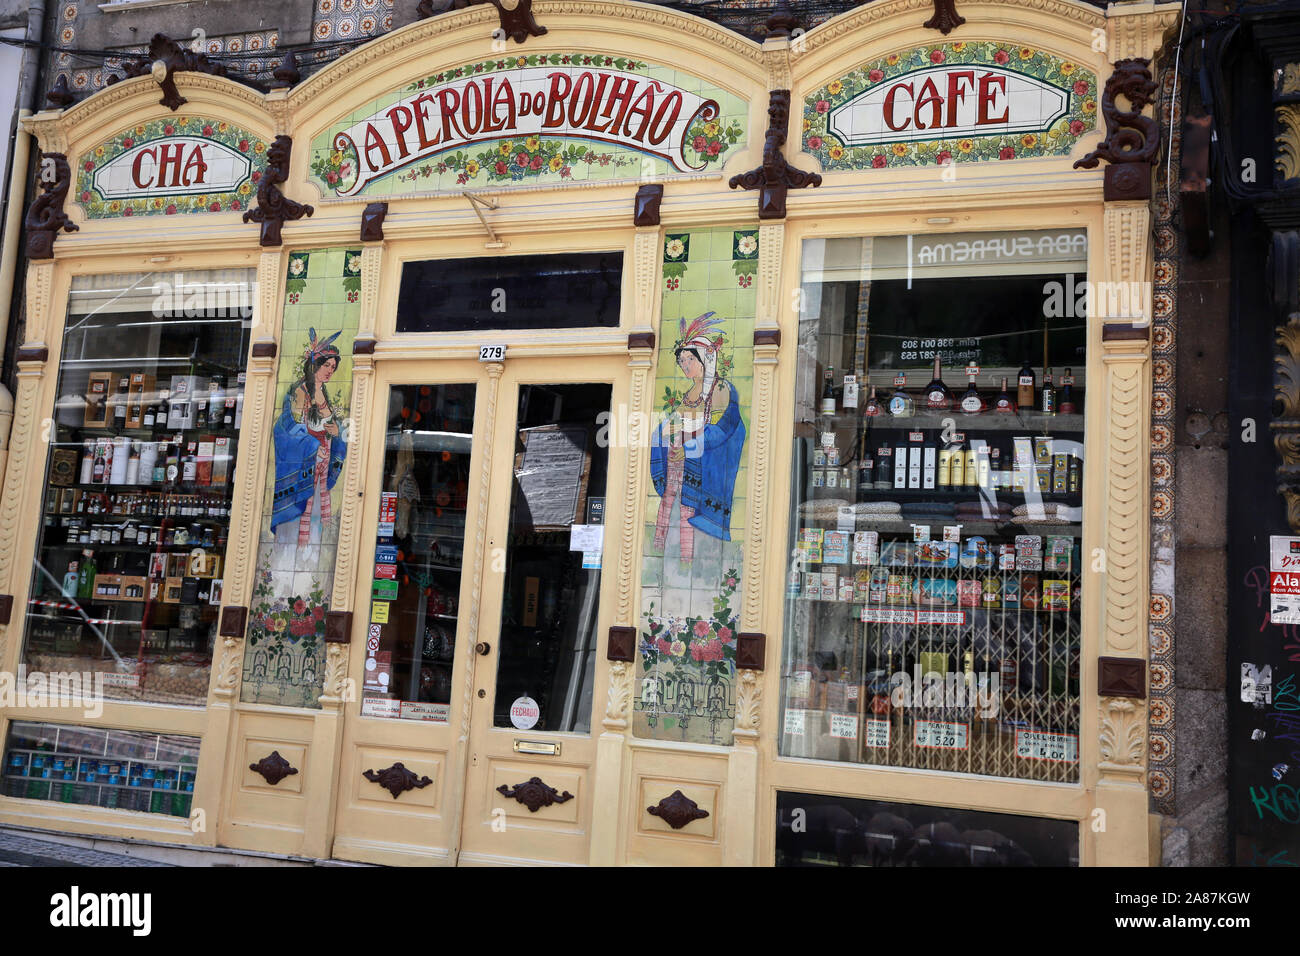 A Perola do Bolhao shop and cafe in Porto, Portugal Stock Photo